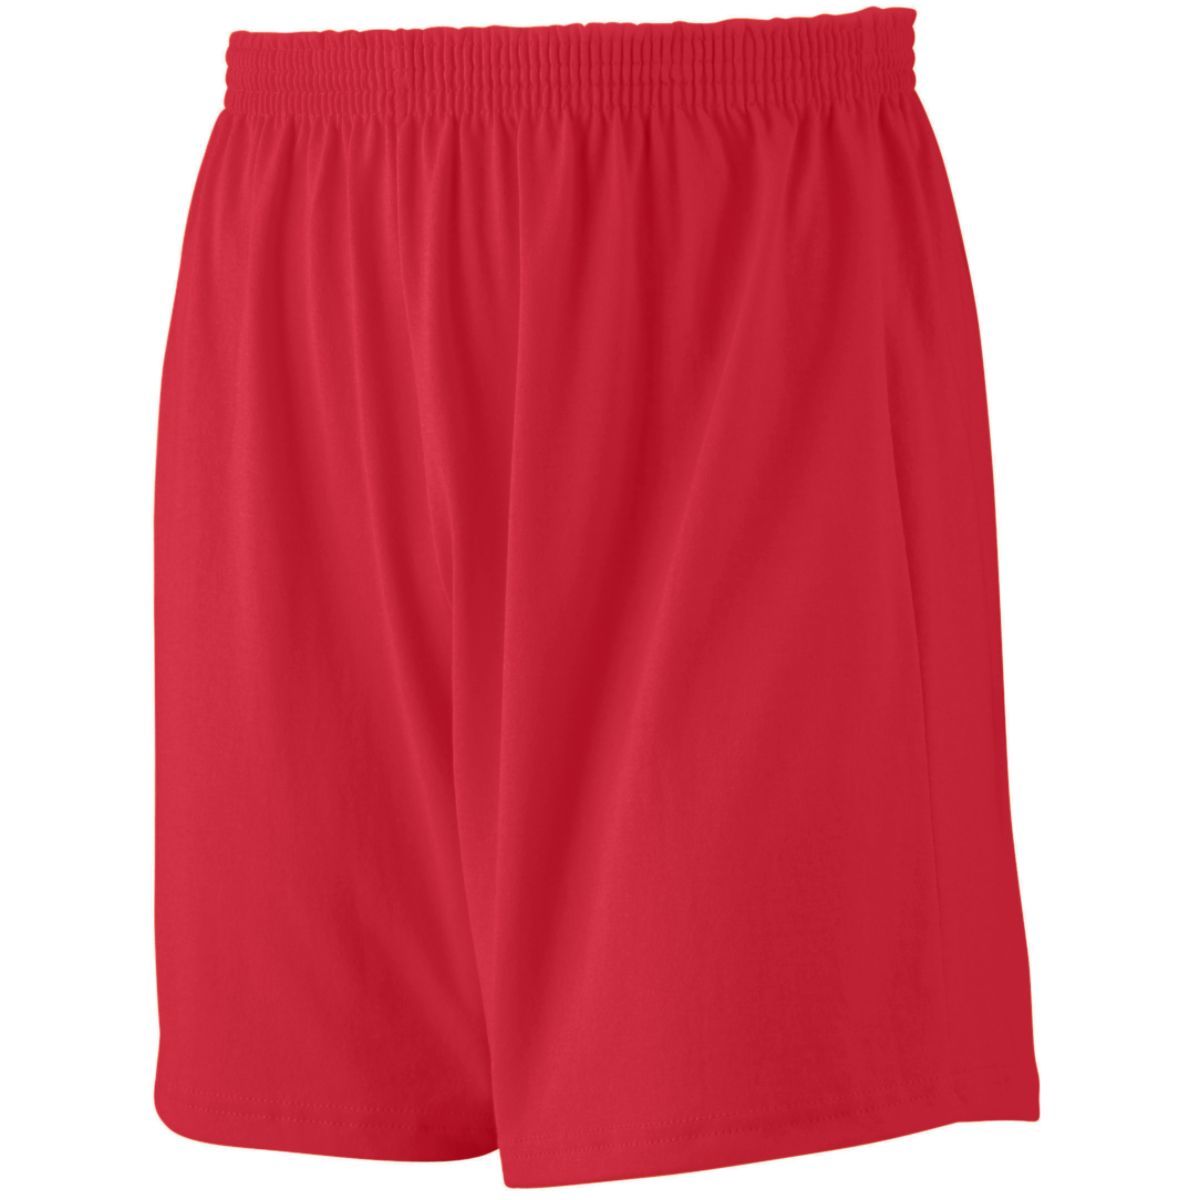 Augusta Sportswear Jersey Knit Shorts in Red  -Part of the Adult, Adult-Shorts, Augusta-Products product lines at KanaleyCreations.com